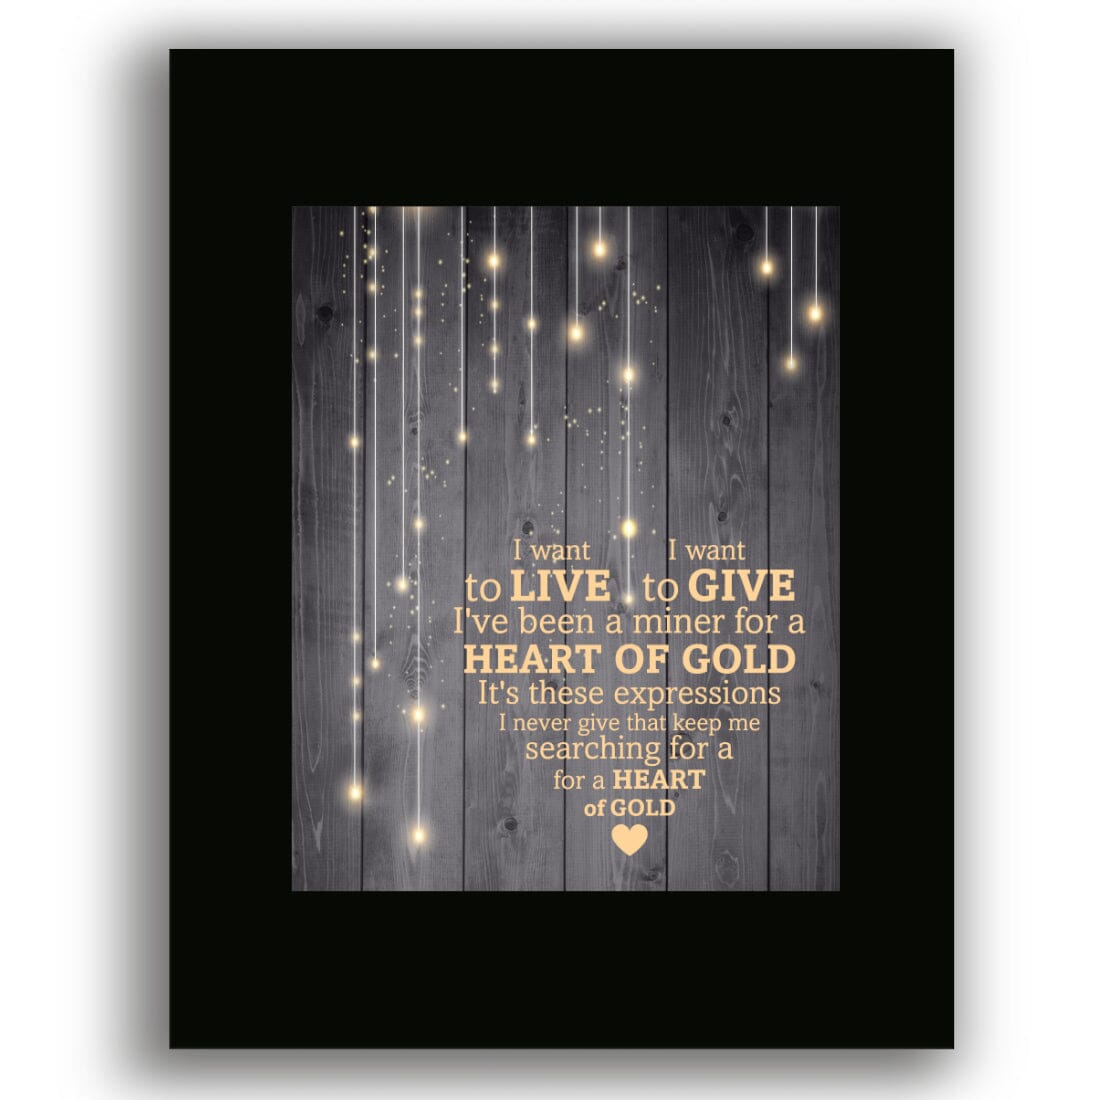 Heart of Gold by Neil Young - Lyric Song Art Wall Print Song Lyrics Art Song Lyrics Art 8x10 Black Matted Print 